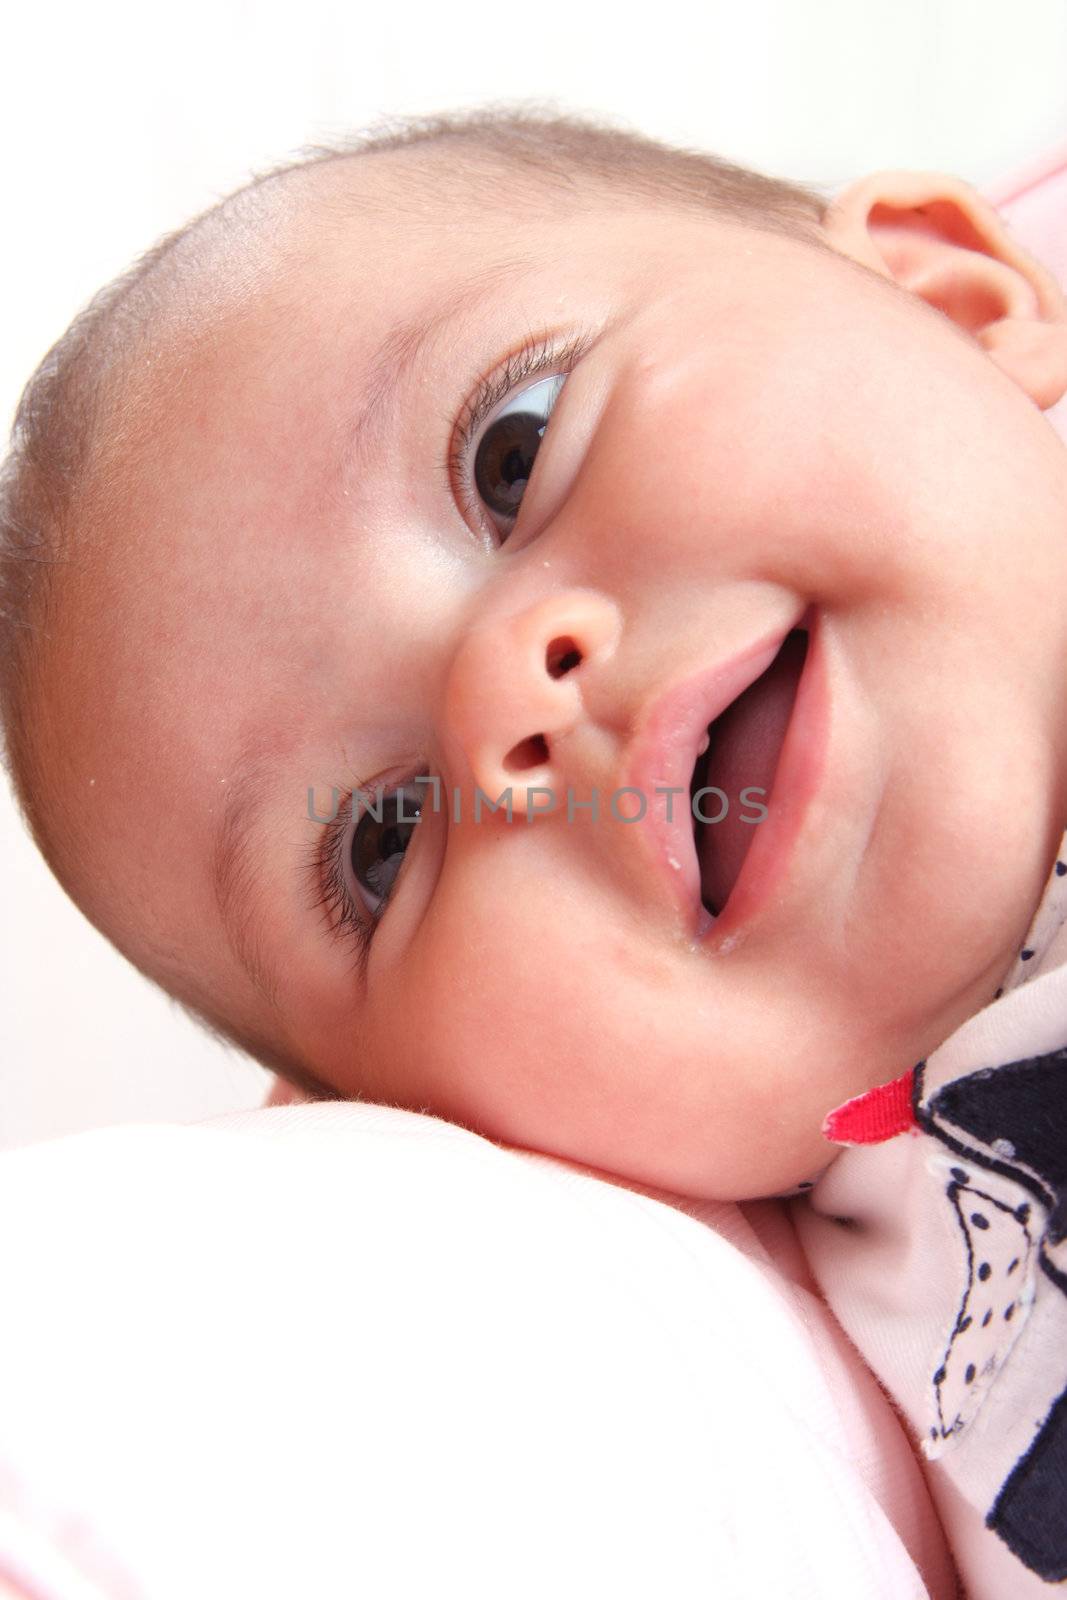 baby laughing by jfcalheiros